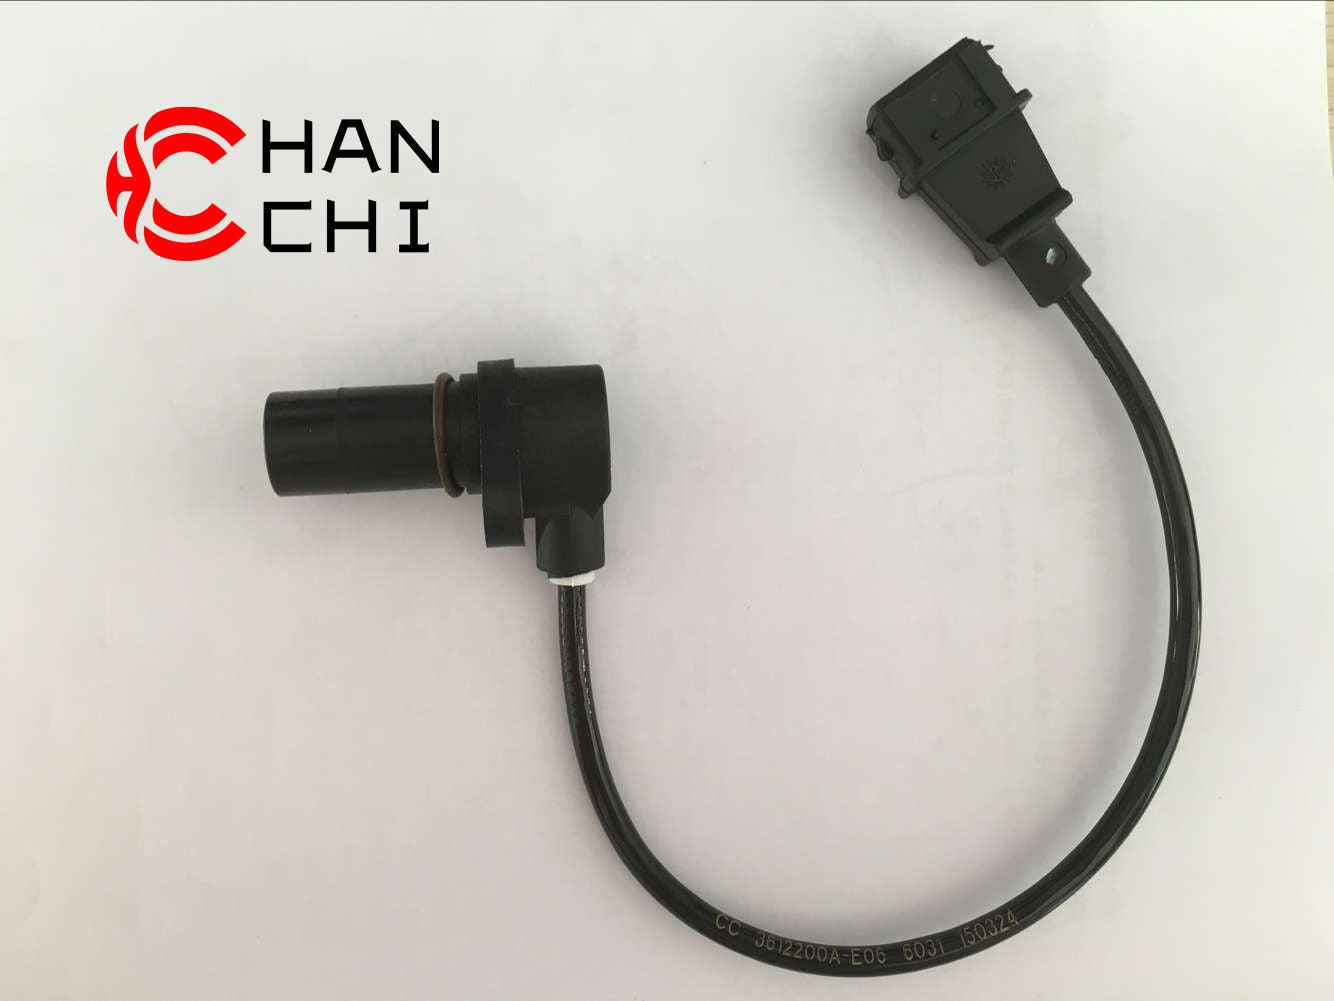 【Description】✔Good Quality✔Generally Applicability✔Competitive PriceEnjoy your shopping time【Features】Brand-New with High Quality for the Aftermarket.Totally mathced your need.**Stable Quality**High Precision**Easy Installation**【Specification】OEM: 0281002285 CSS223 3612200A-E06Material: ABSColor: blackOrigin: Made in ChinaWeight: 100g【Packing List】1* Crankshaft Position Sensor 【More Service】 We can provide OEM service We can Be your one-step solution for Auto Parts We can provide technical sche